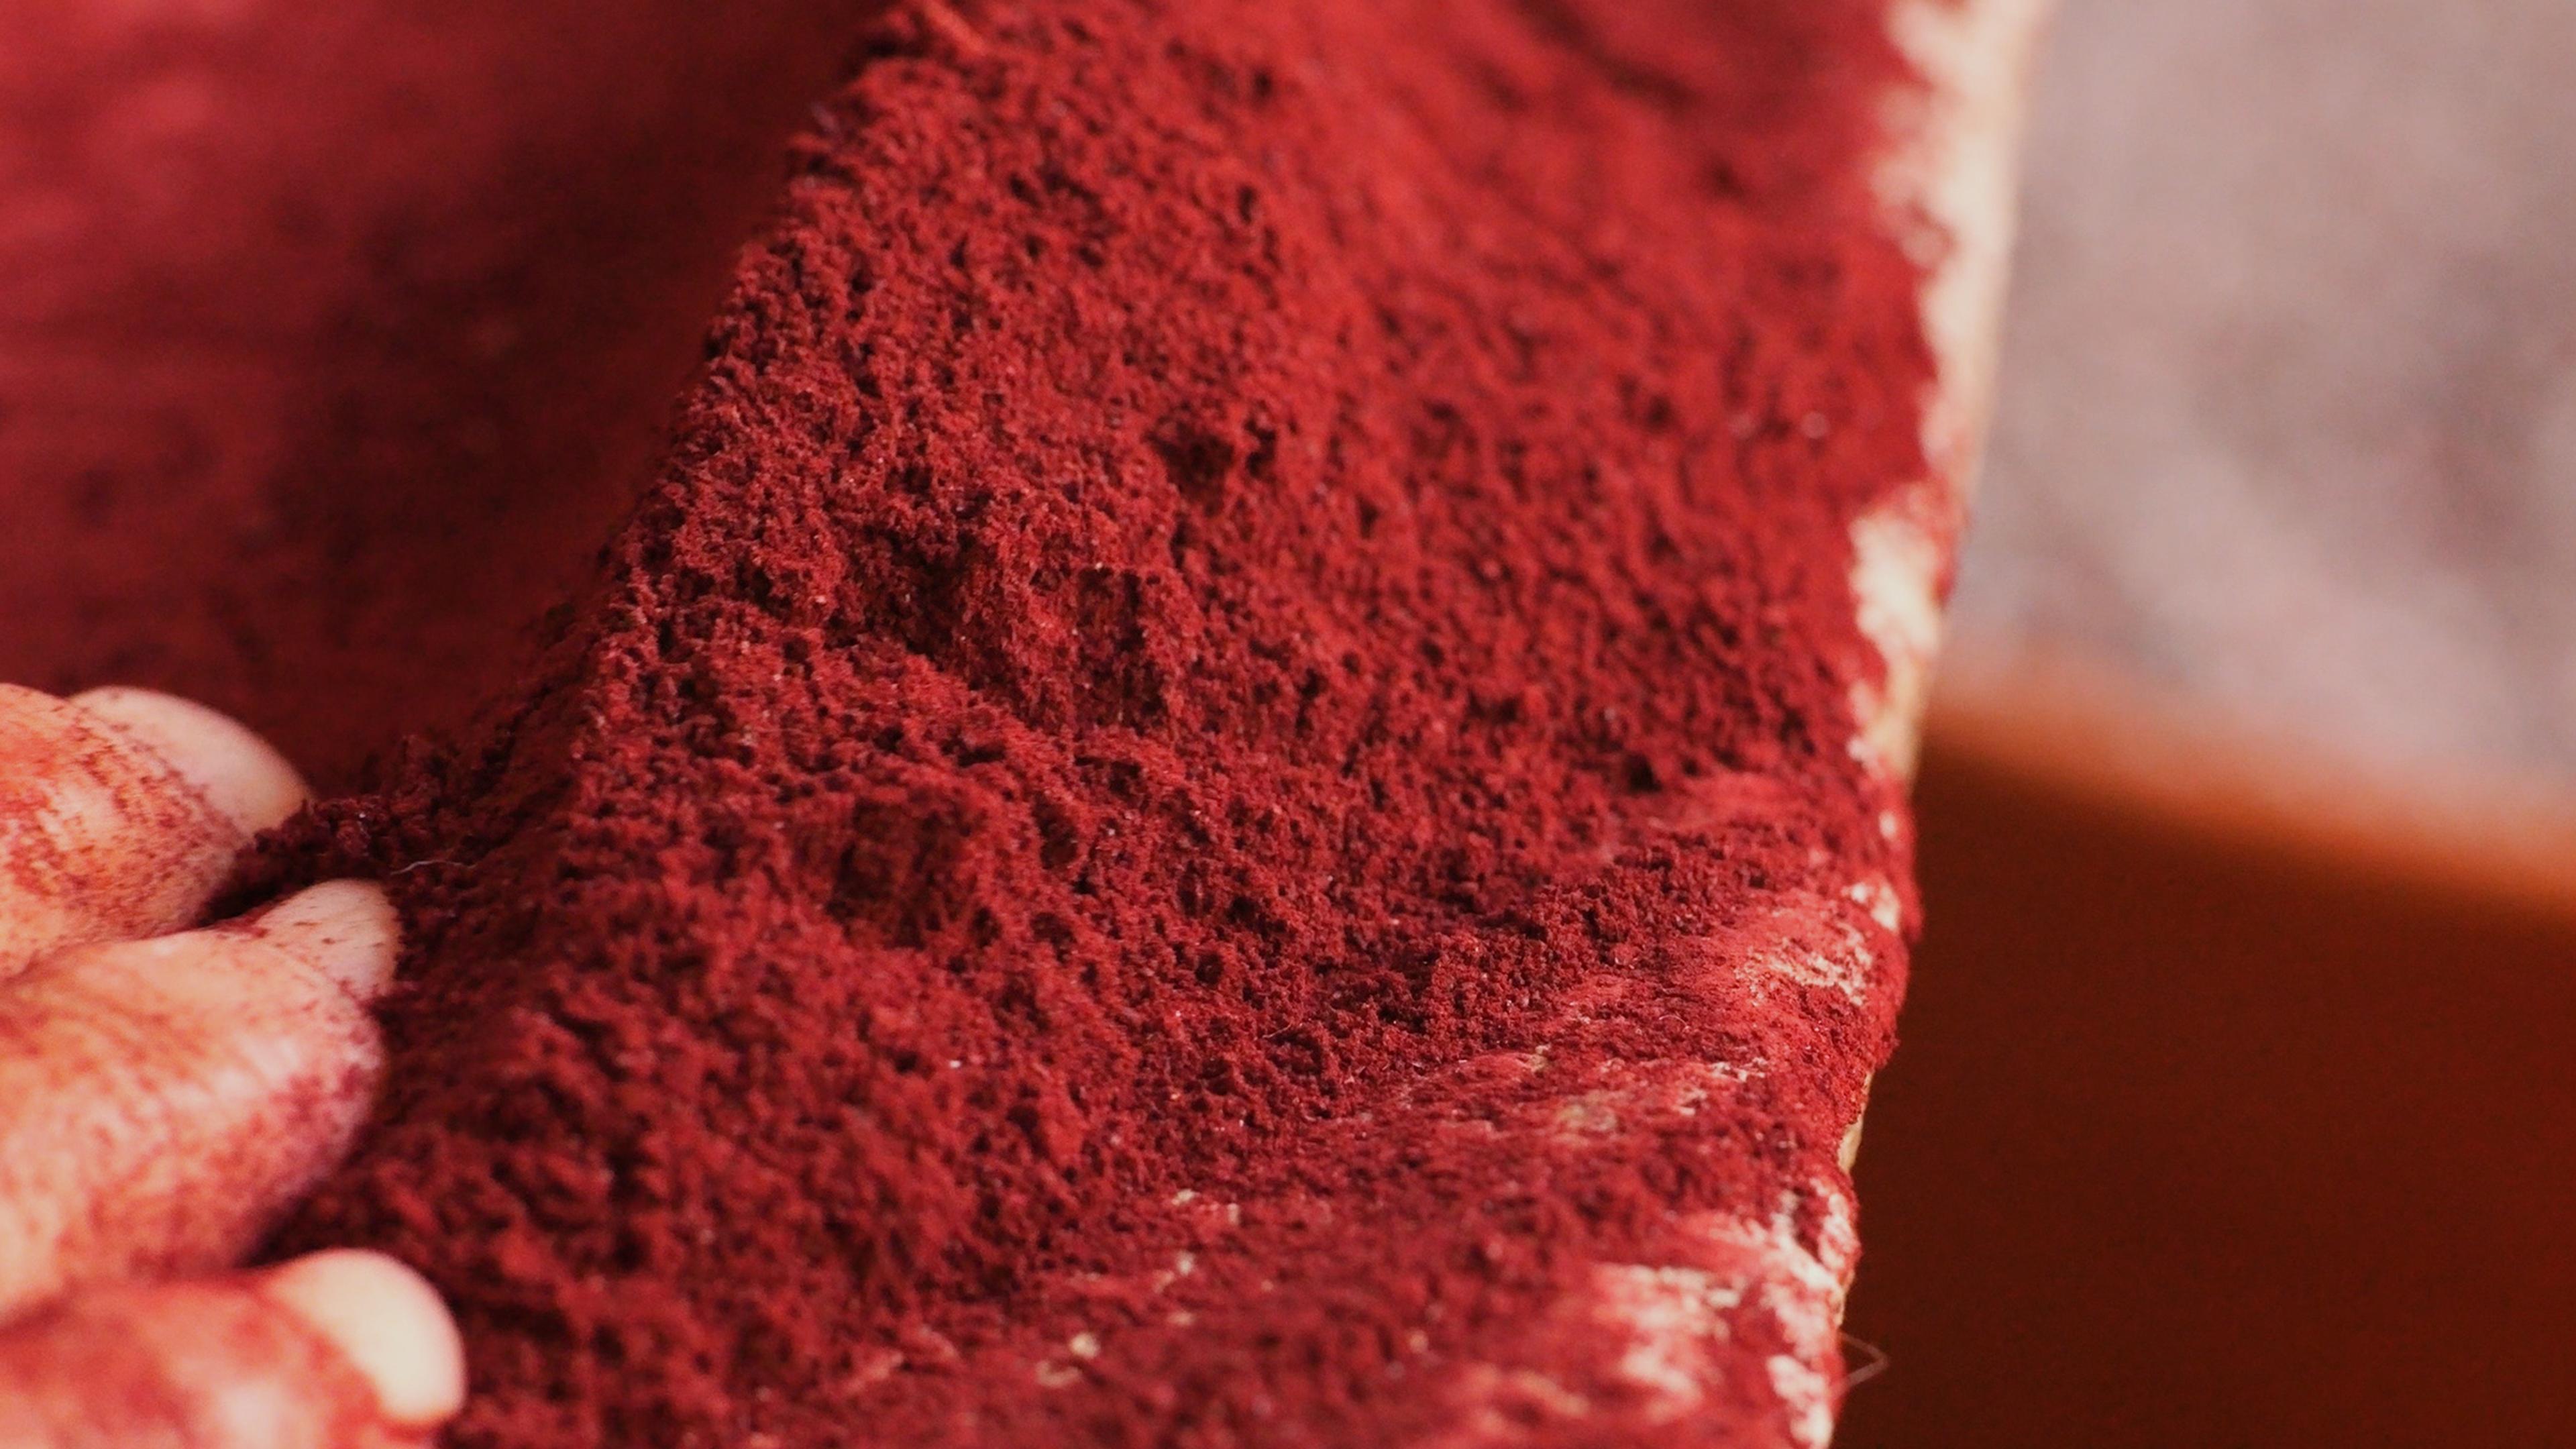 Close-up image of a hand holding a pile of vibrant red powder, possibly a spice or pigment, displaying a textured and granular surface. The background is blurred, ensuring the focus remains on the red powder and the hand.